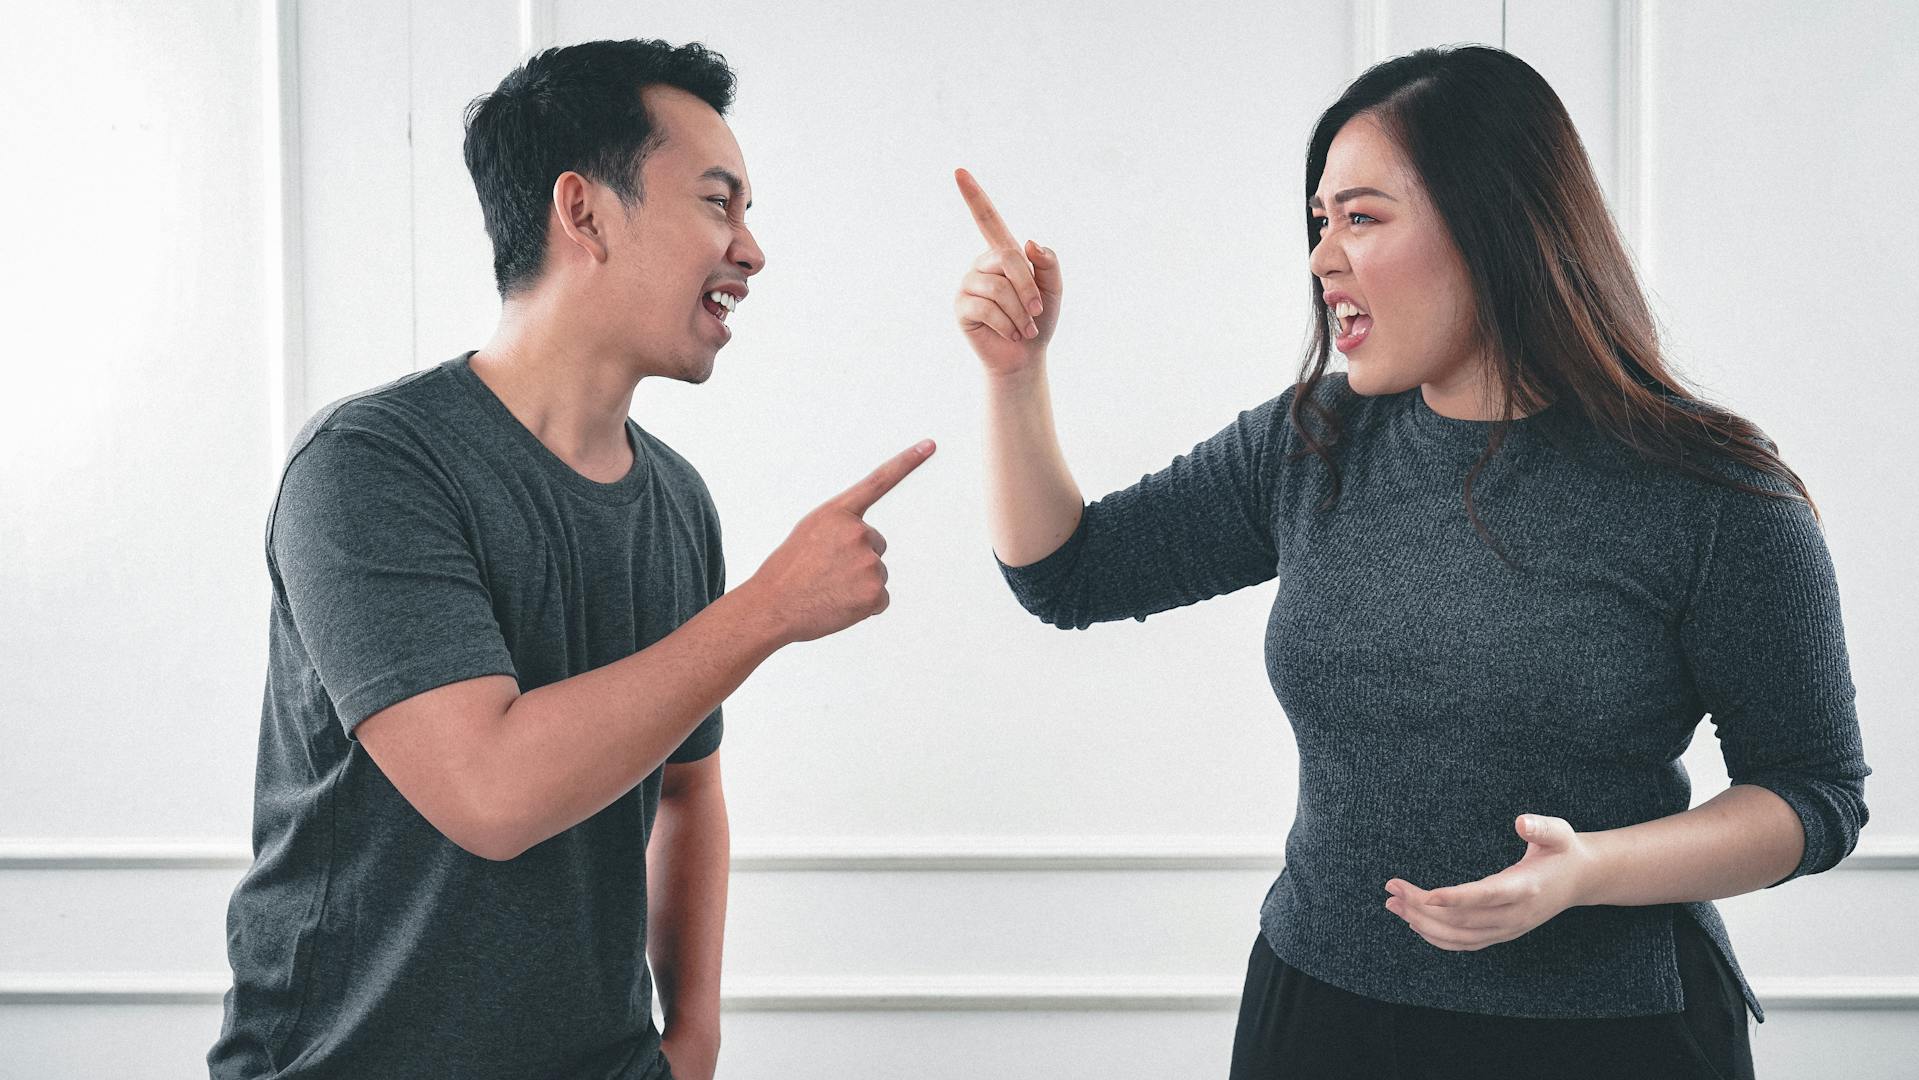 A man and woman having a heated discussion | Source: Pexels